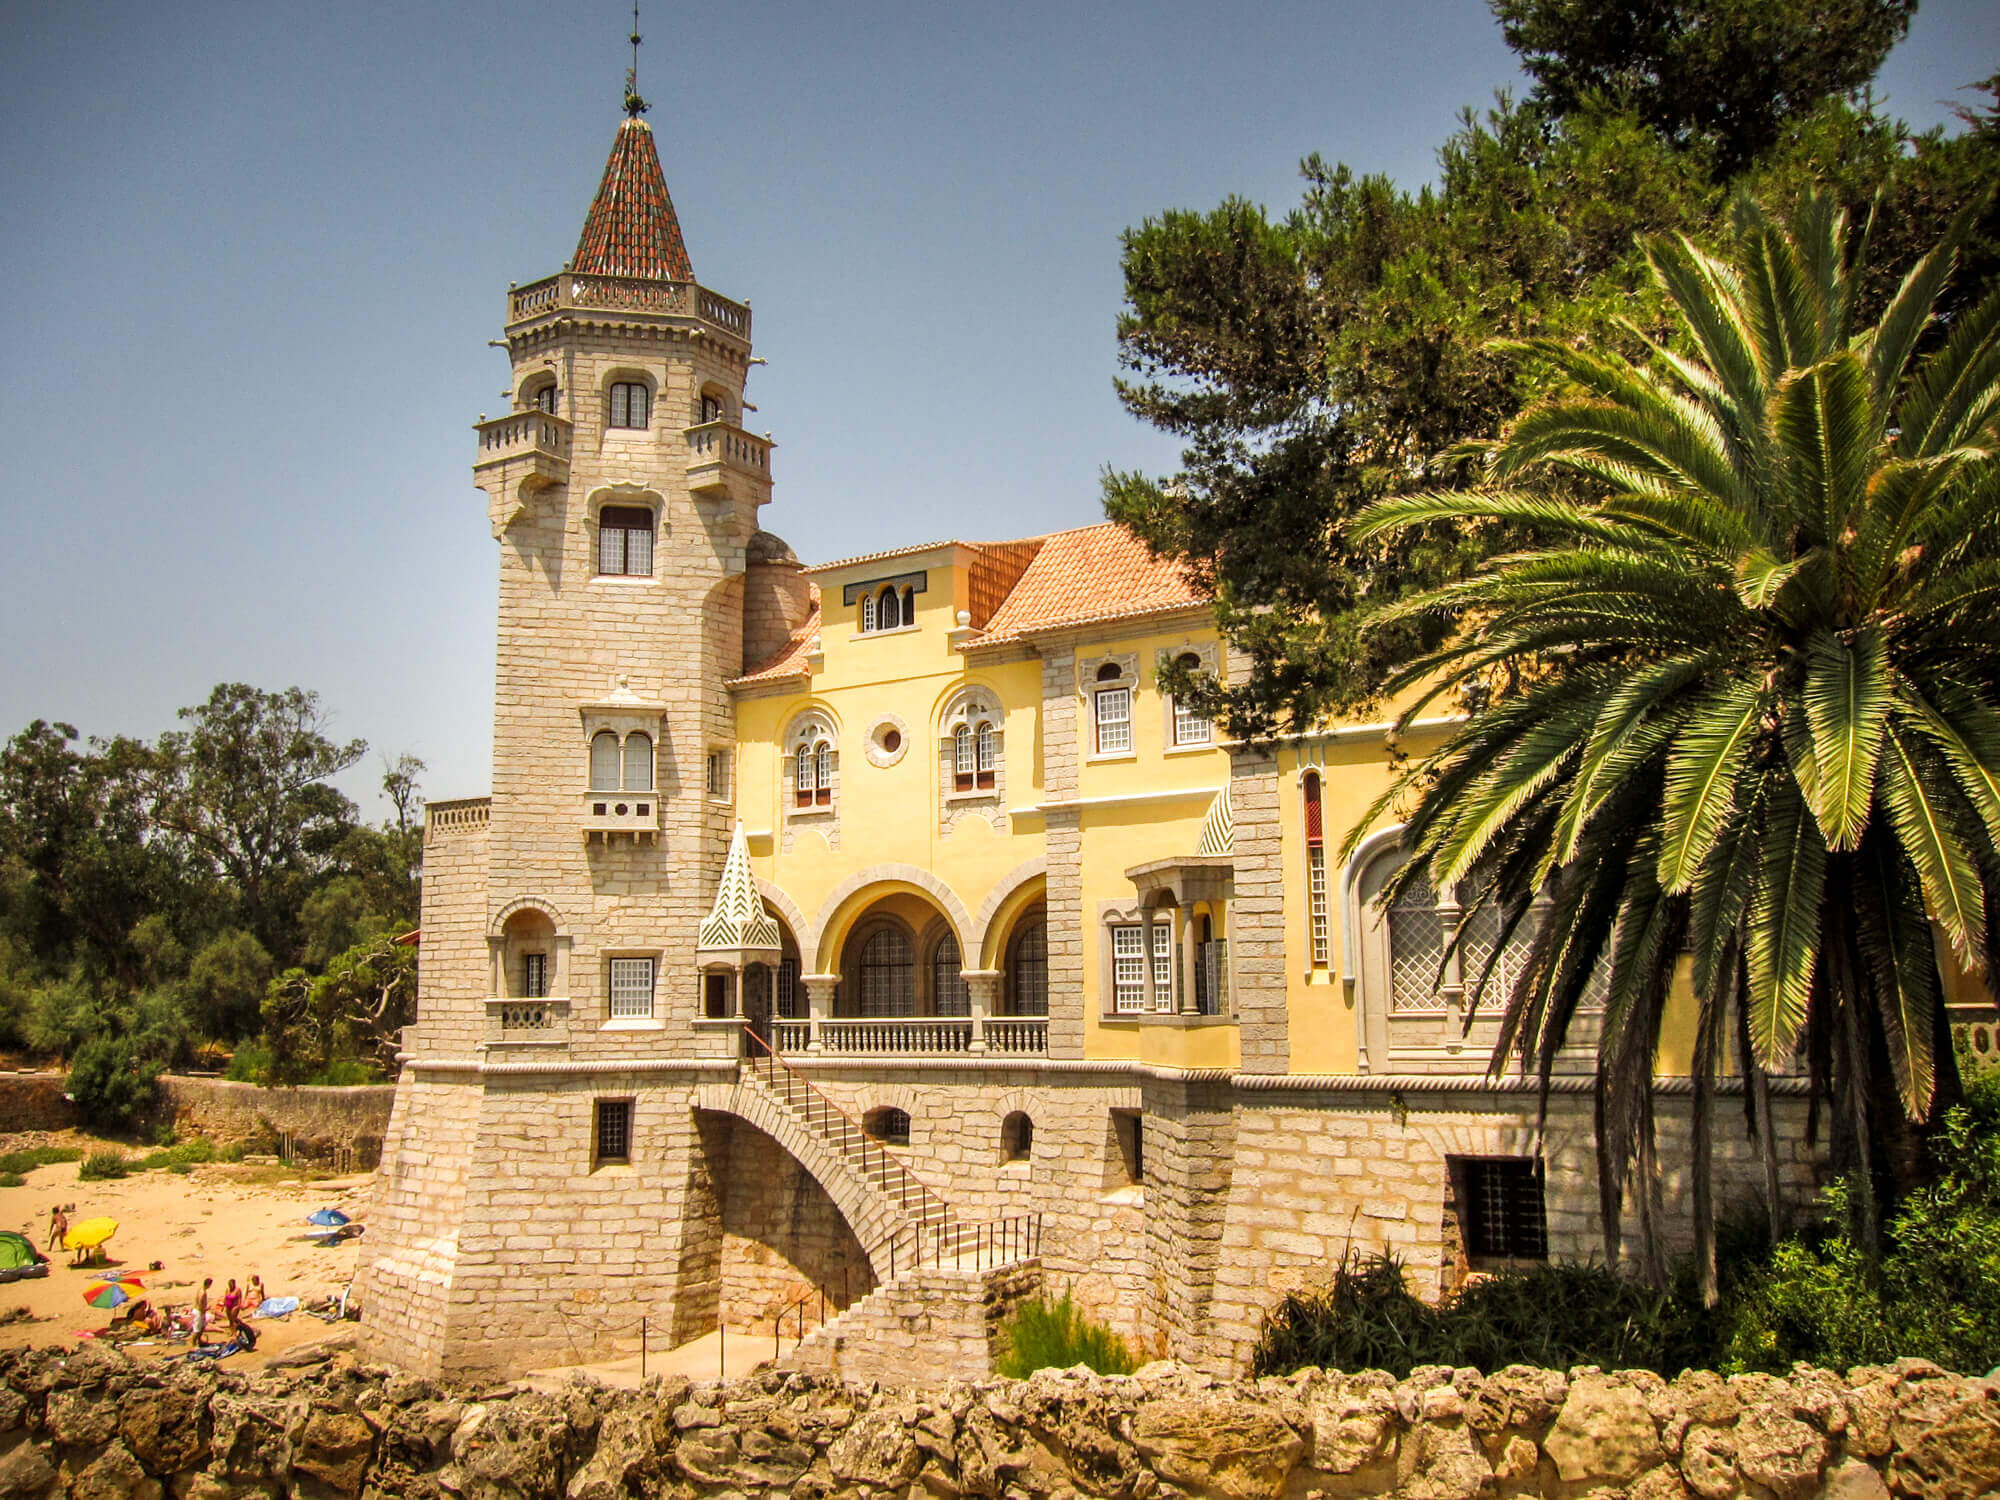 Villa in Cascais the perfect place for a long weekend.